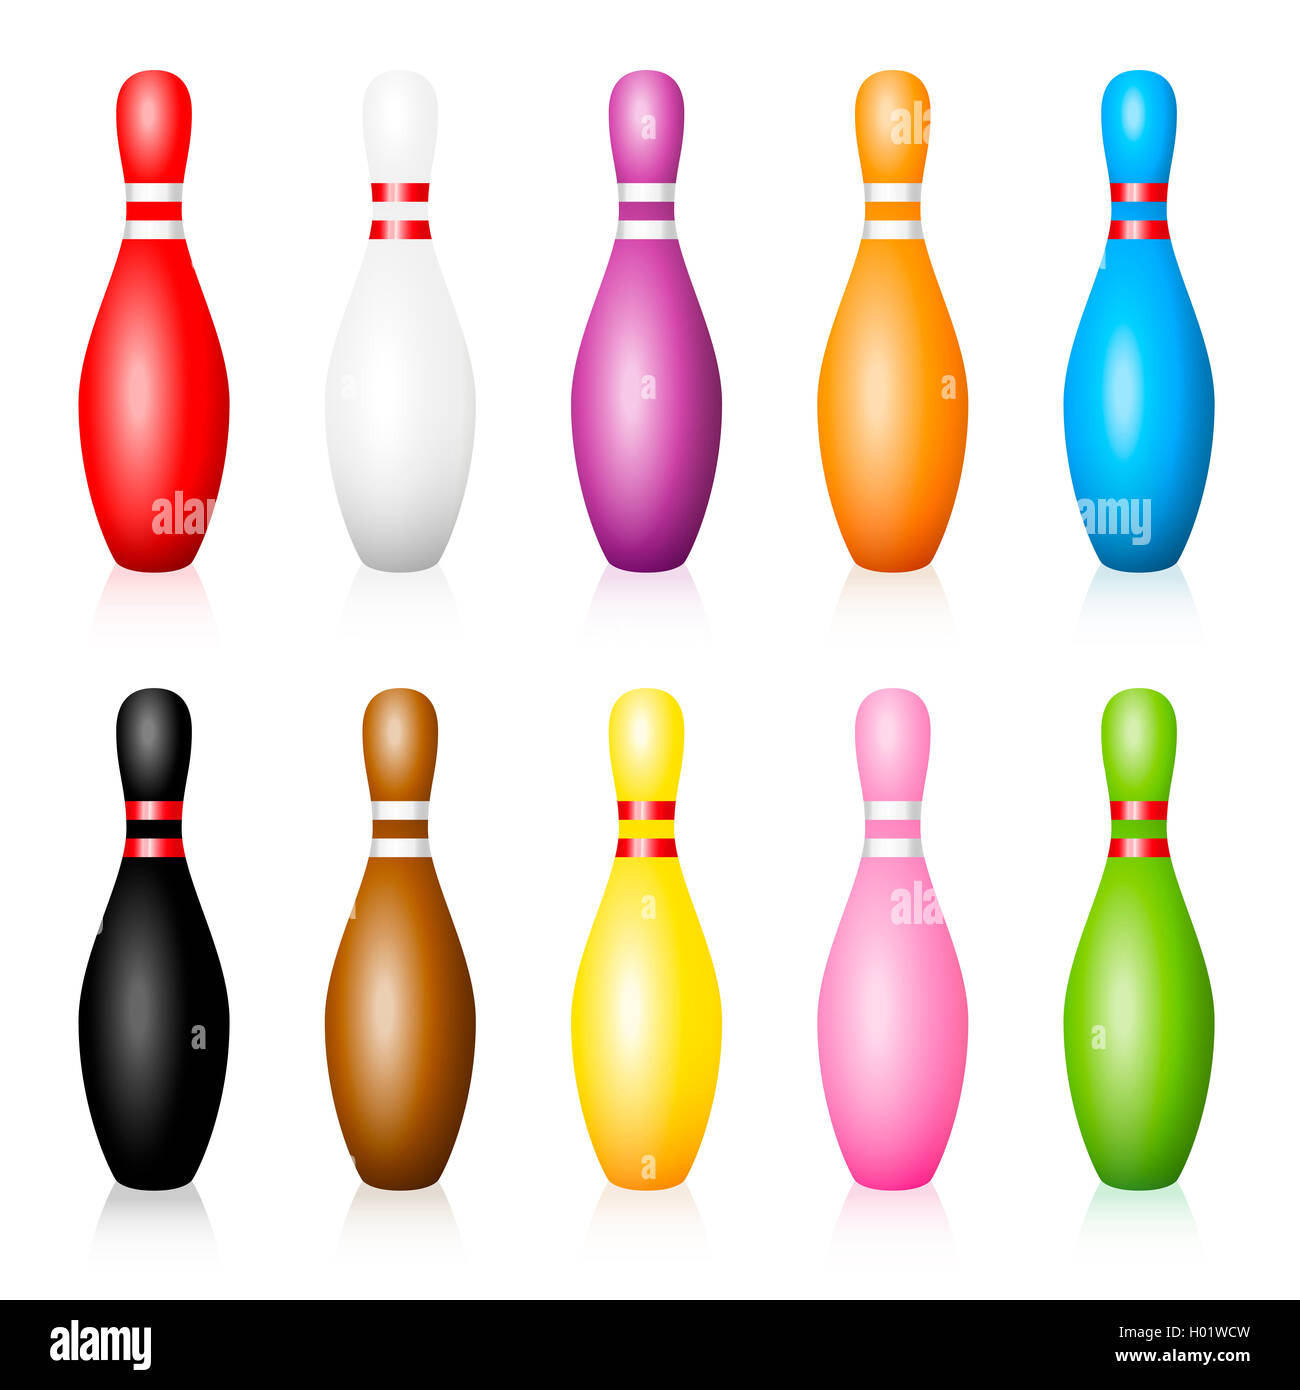 Bowling pins - set with ten different colors - illustration on white background. Stock Photo